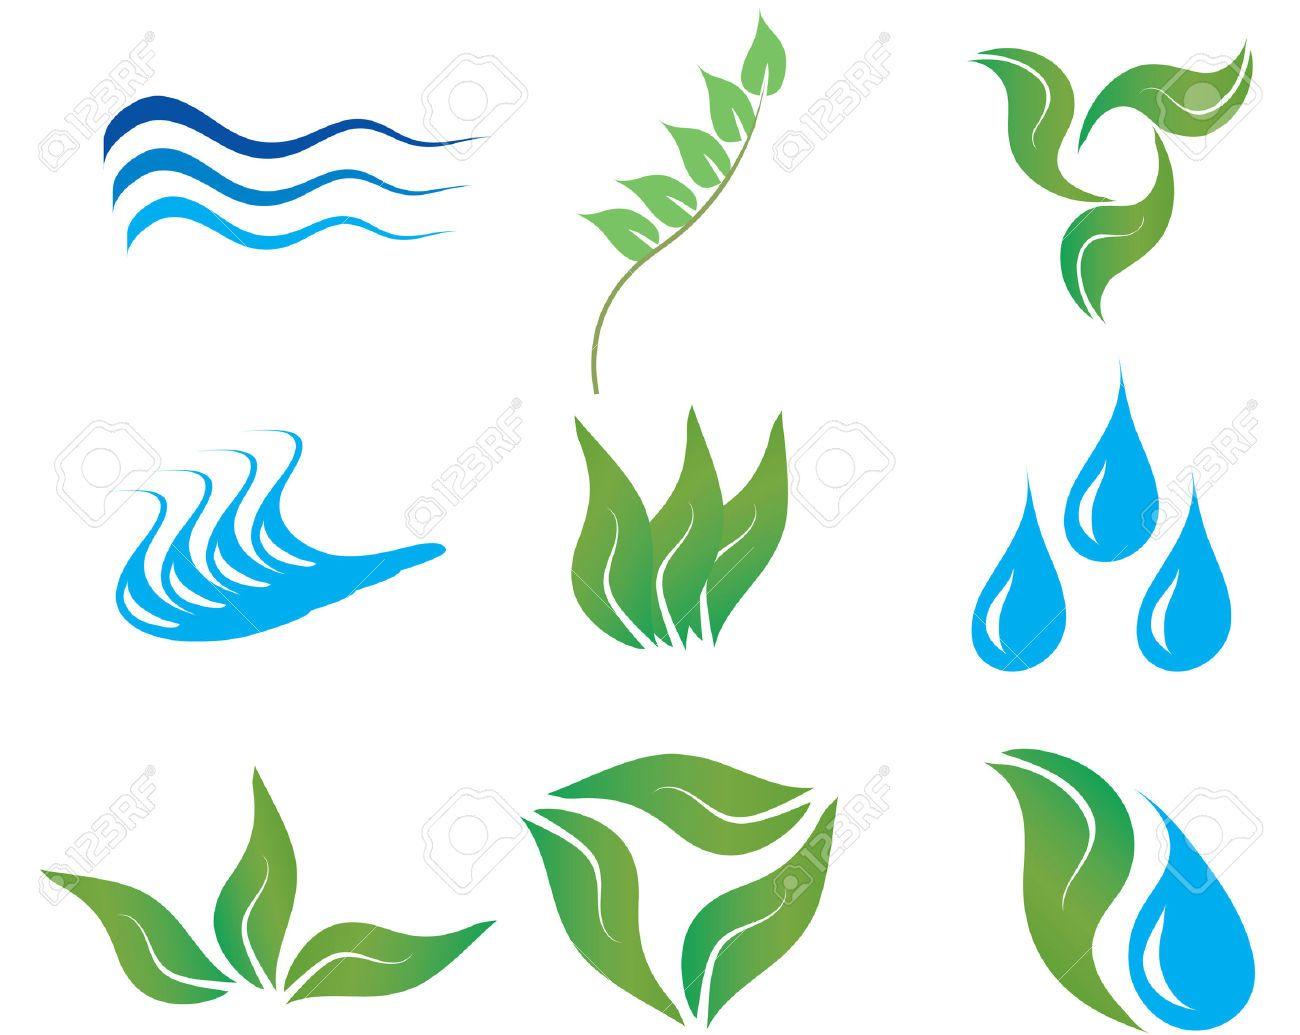 River Water Logo - River logo freeuse - RR collections